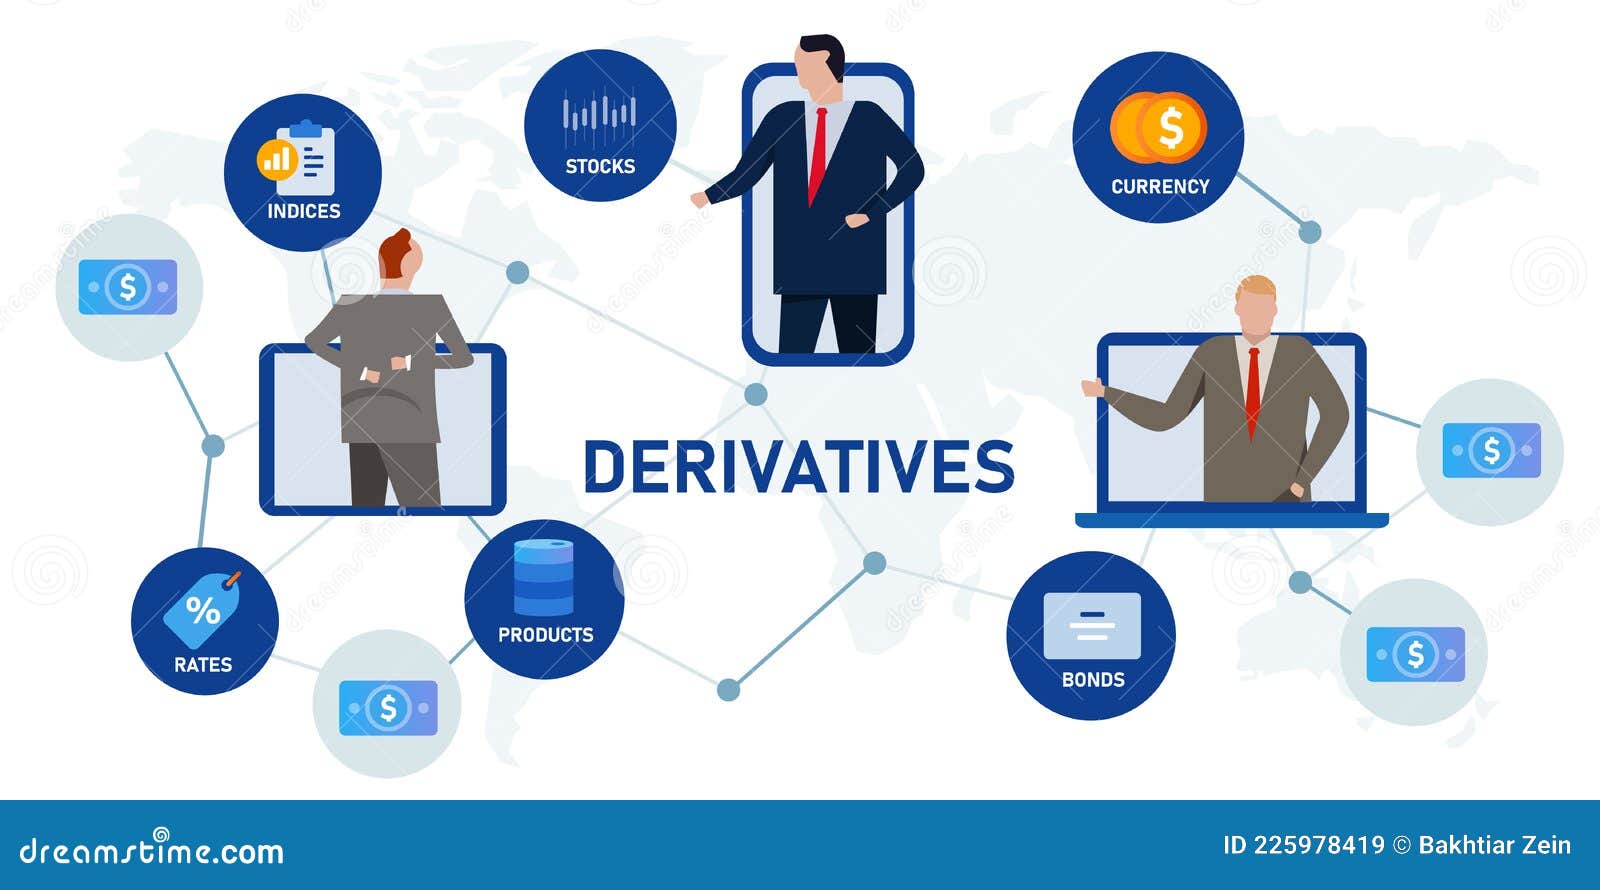 derivatives investment based on underlying financial asset like an index bonds commodities currencies interest